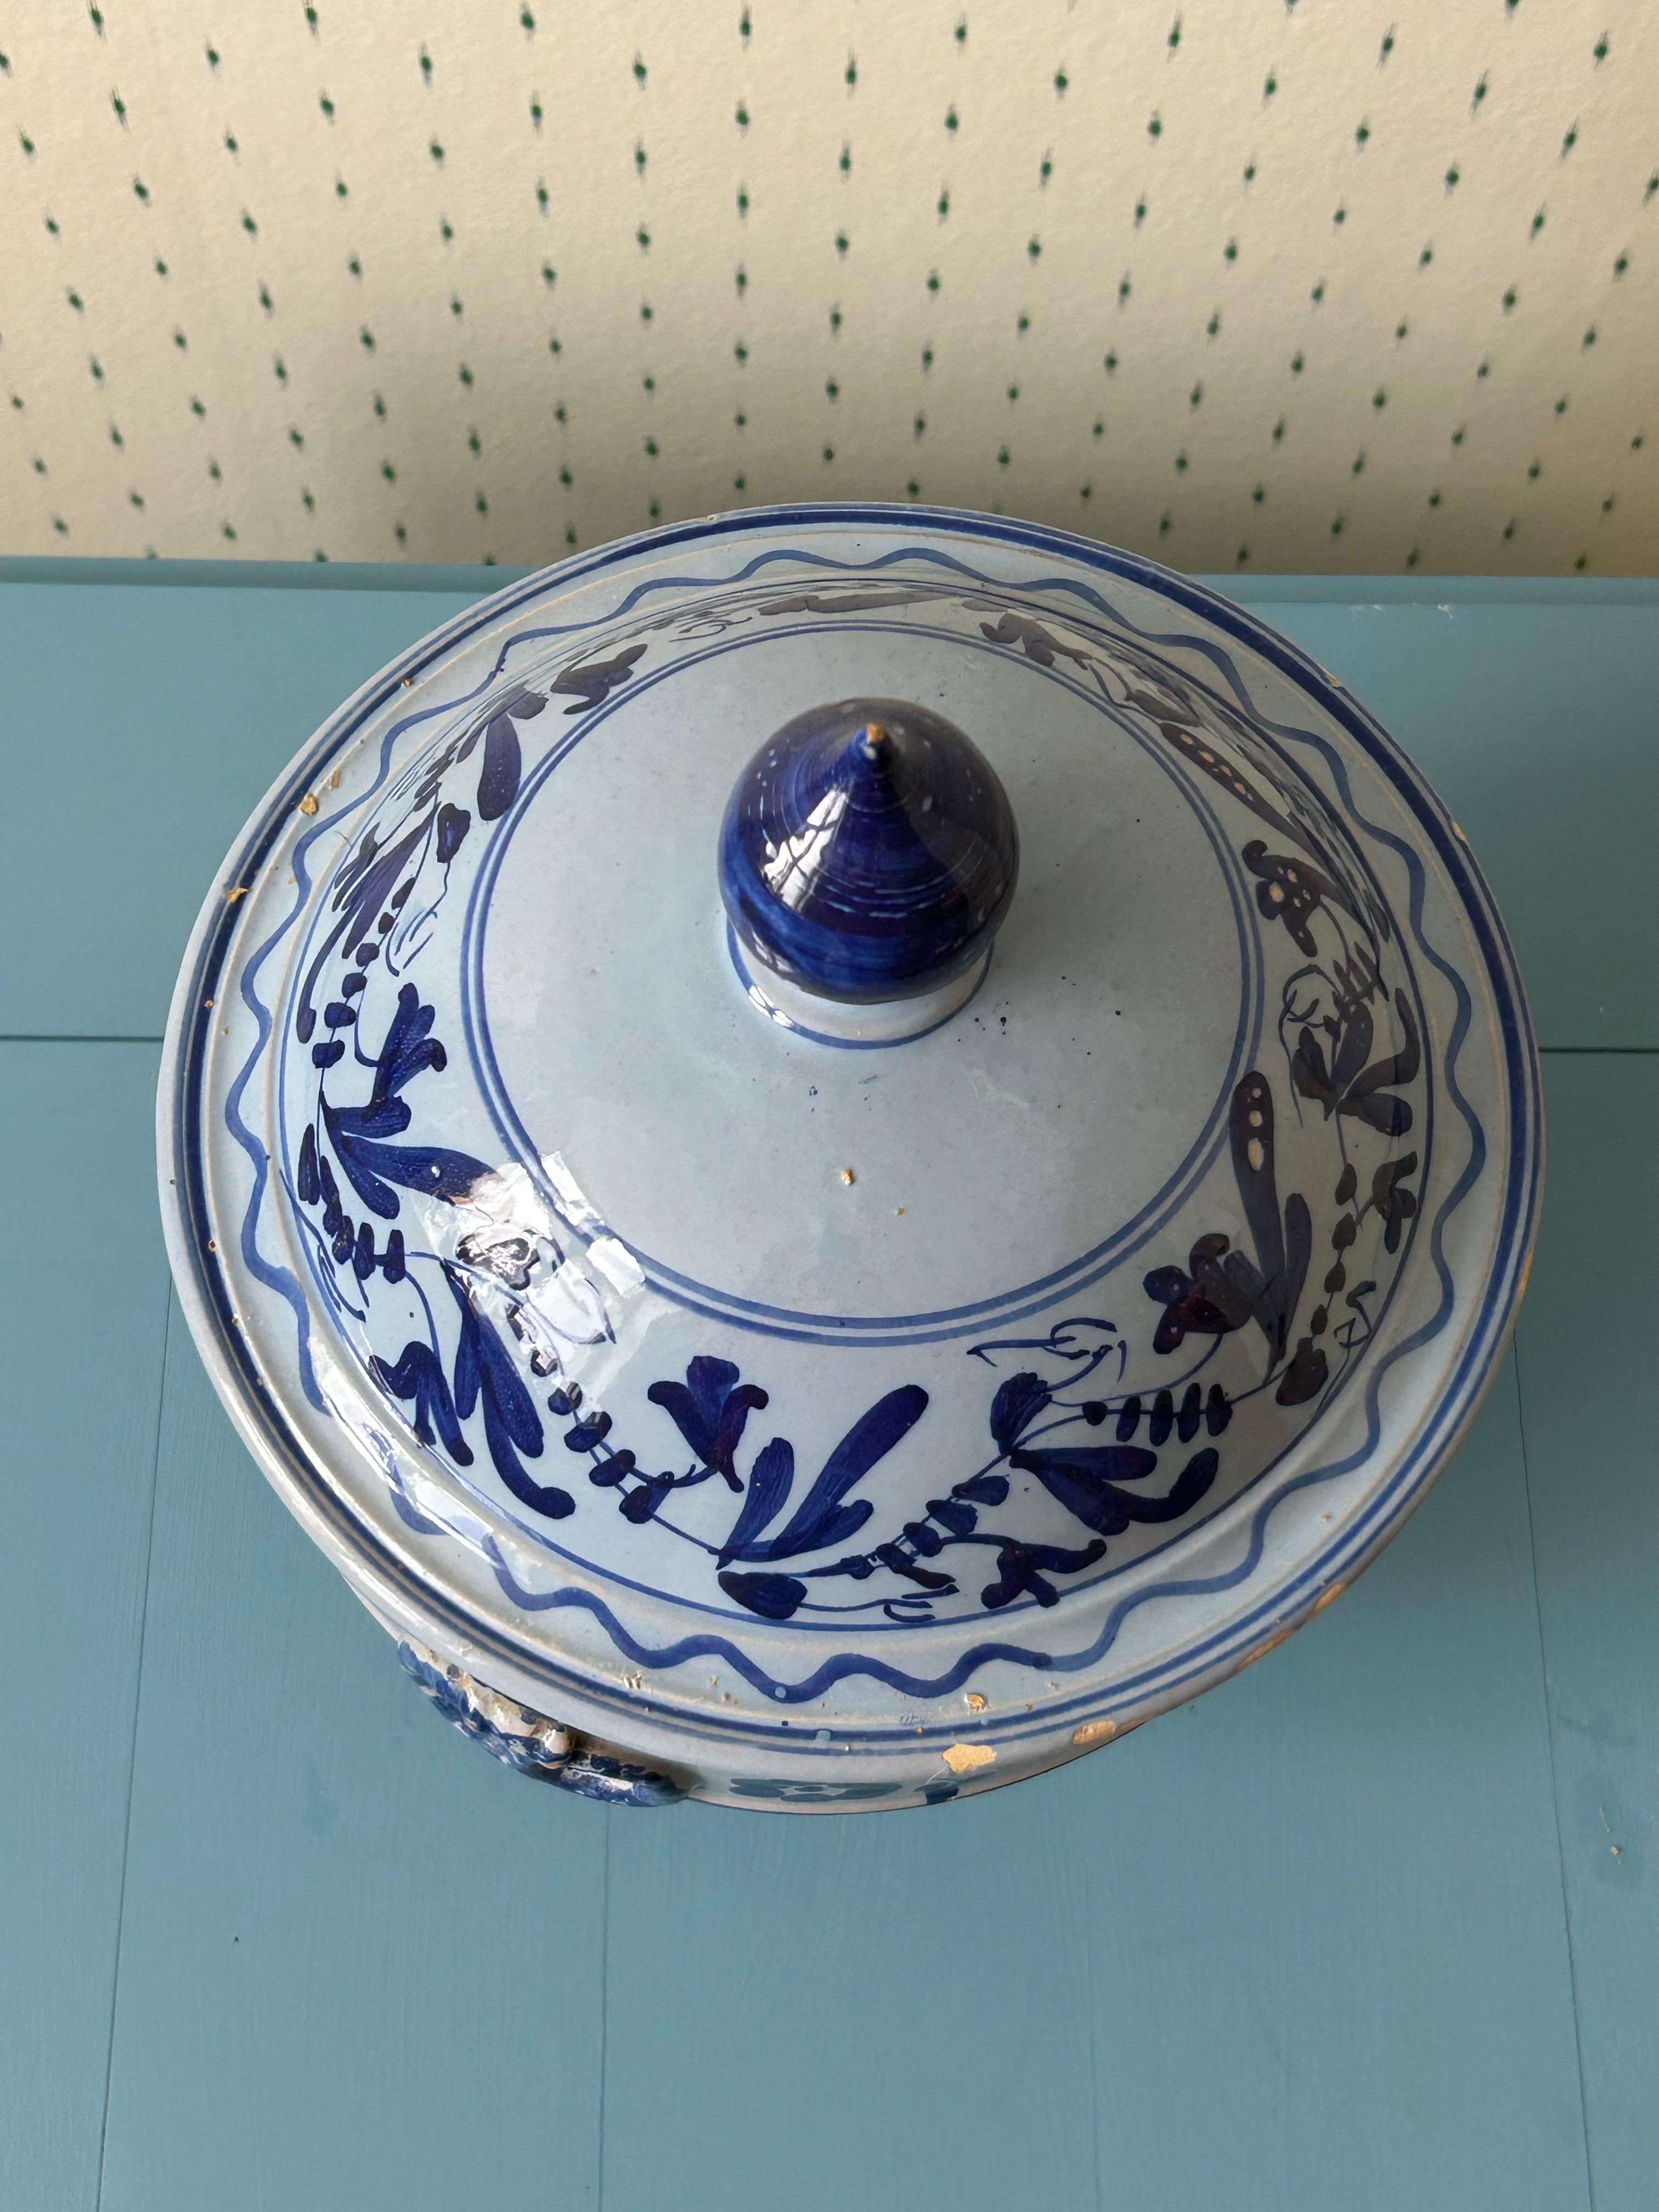 Hand-Crafted Vintage Ceramic Tureens with Blue Flower Decorations, Italy, Late 19th-Century For Sale